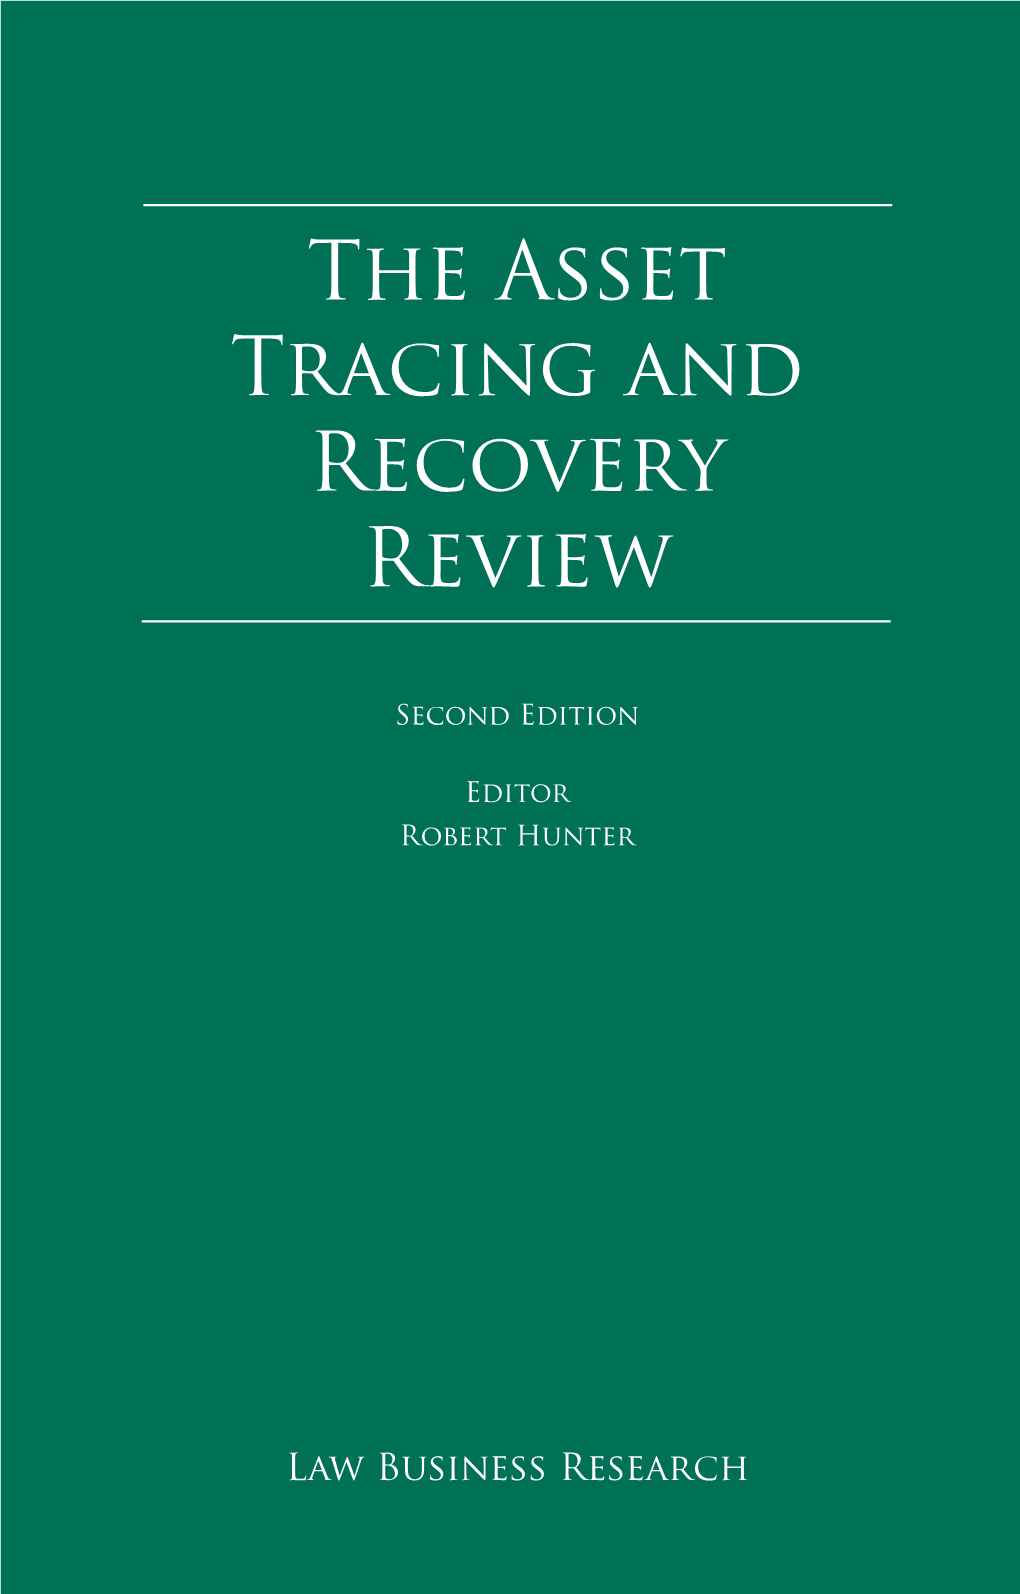 The Asset Tracing and Recovery Review